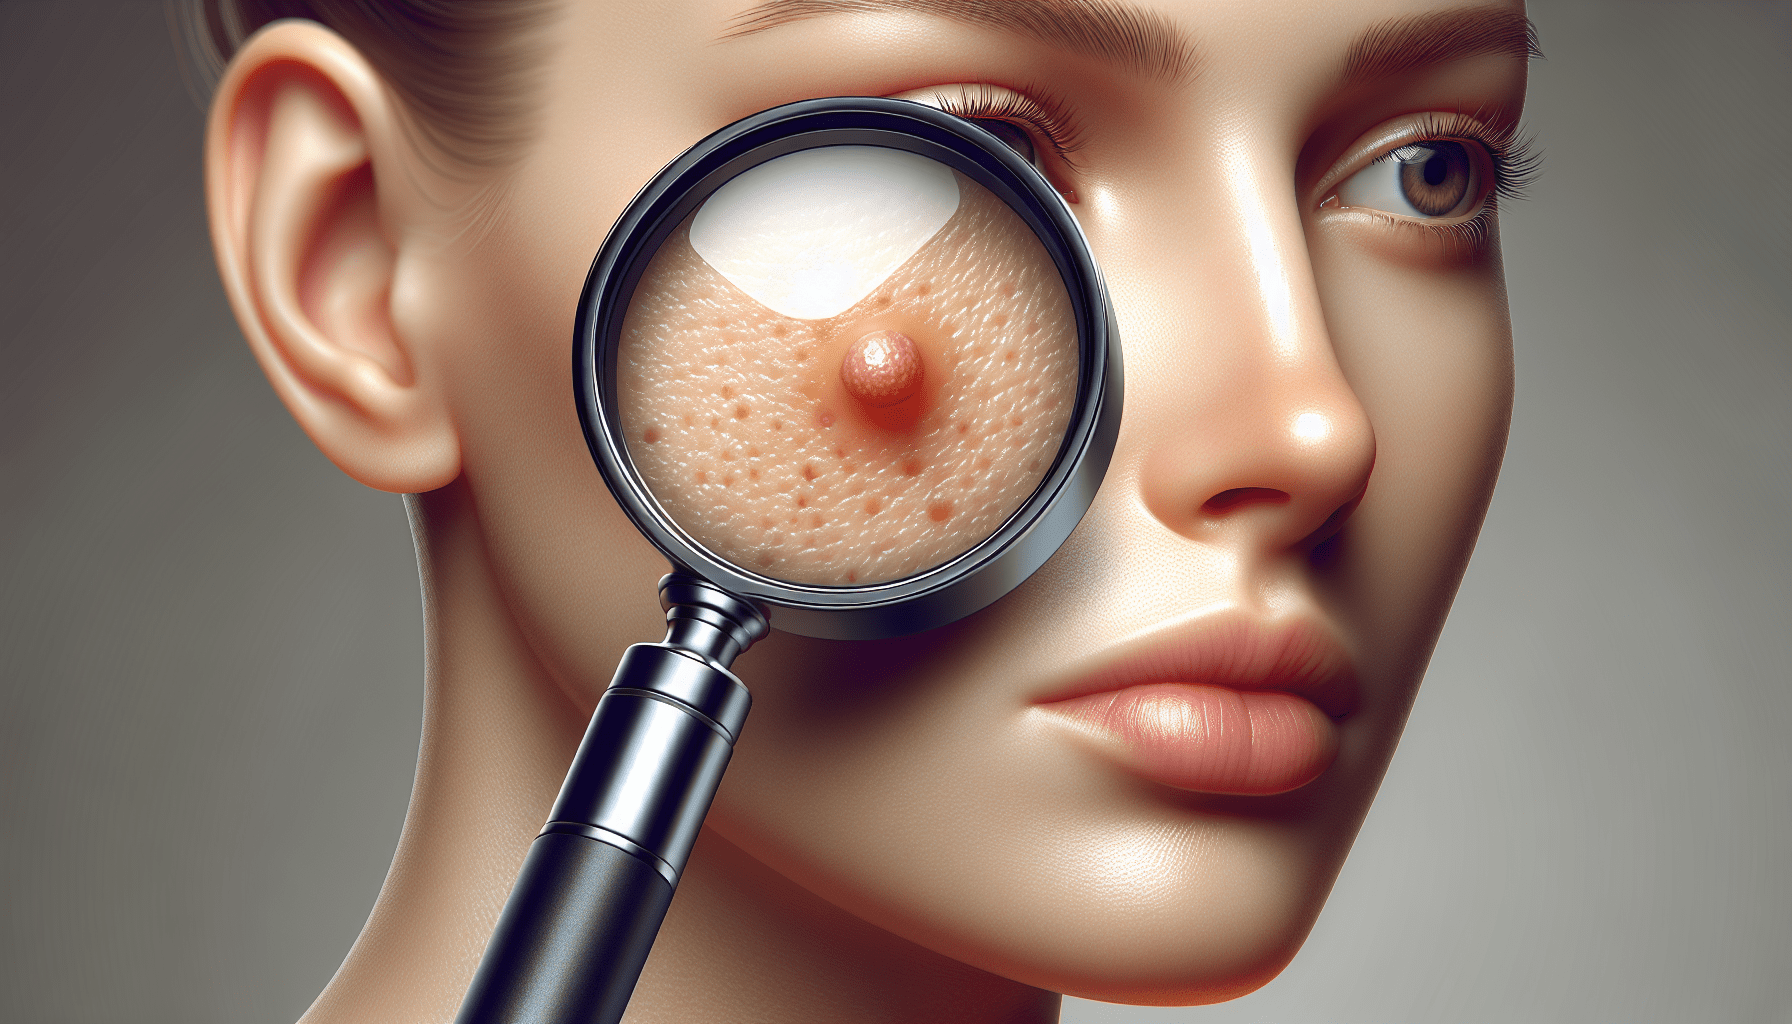 Is It Better To Remove Blackheads Or Leave Them?